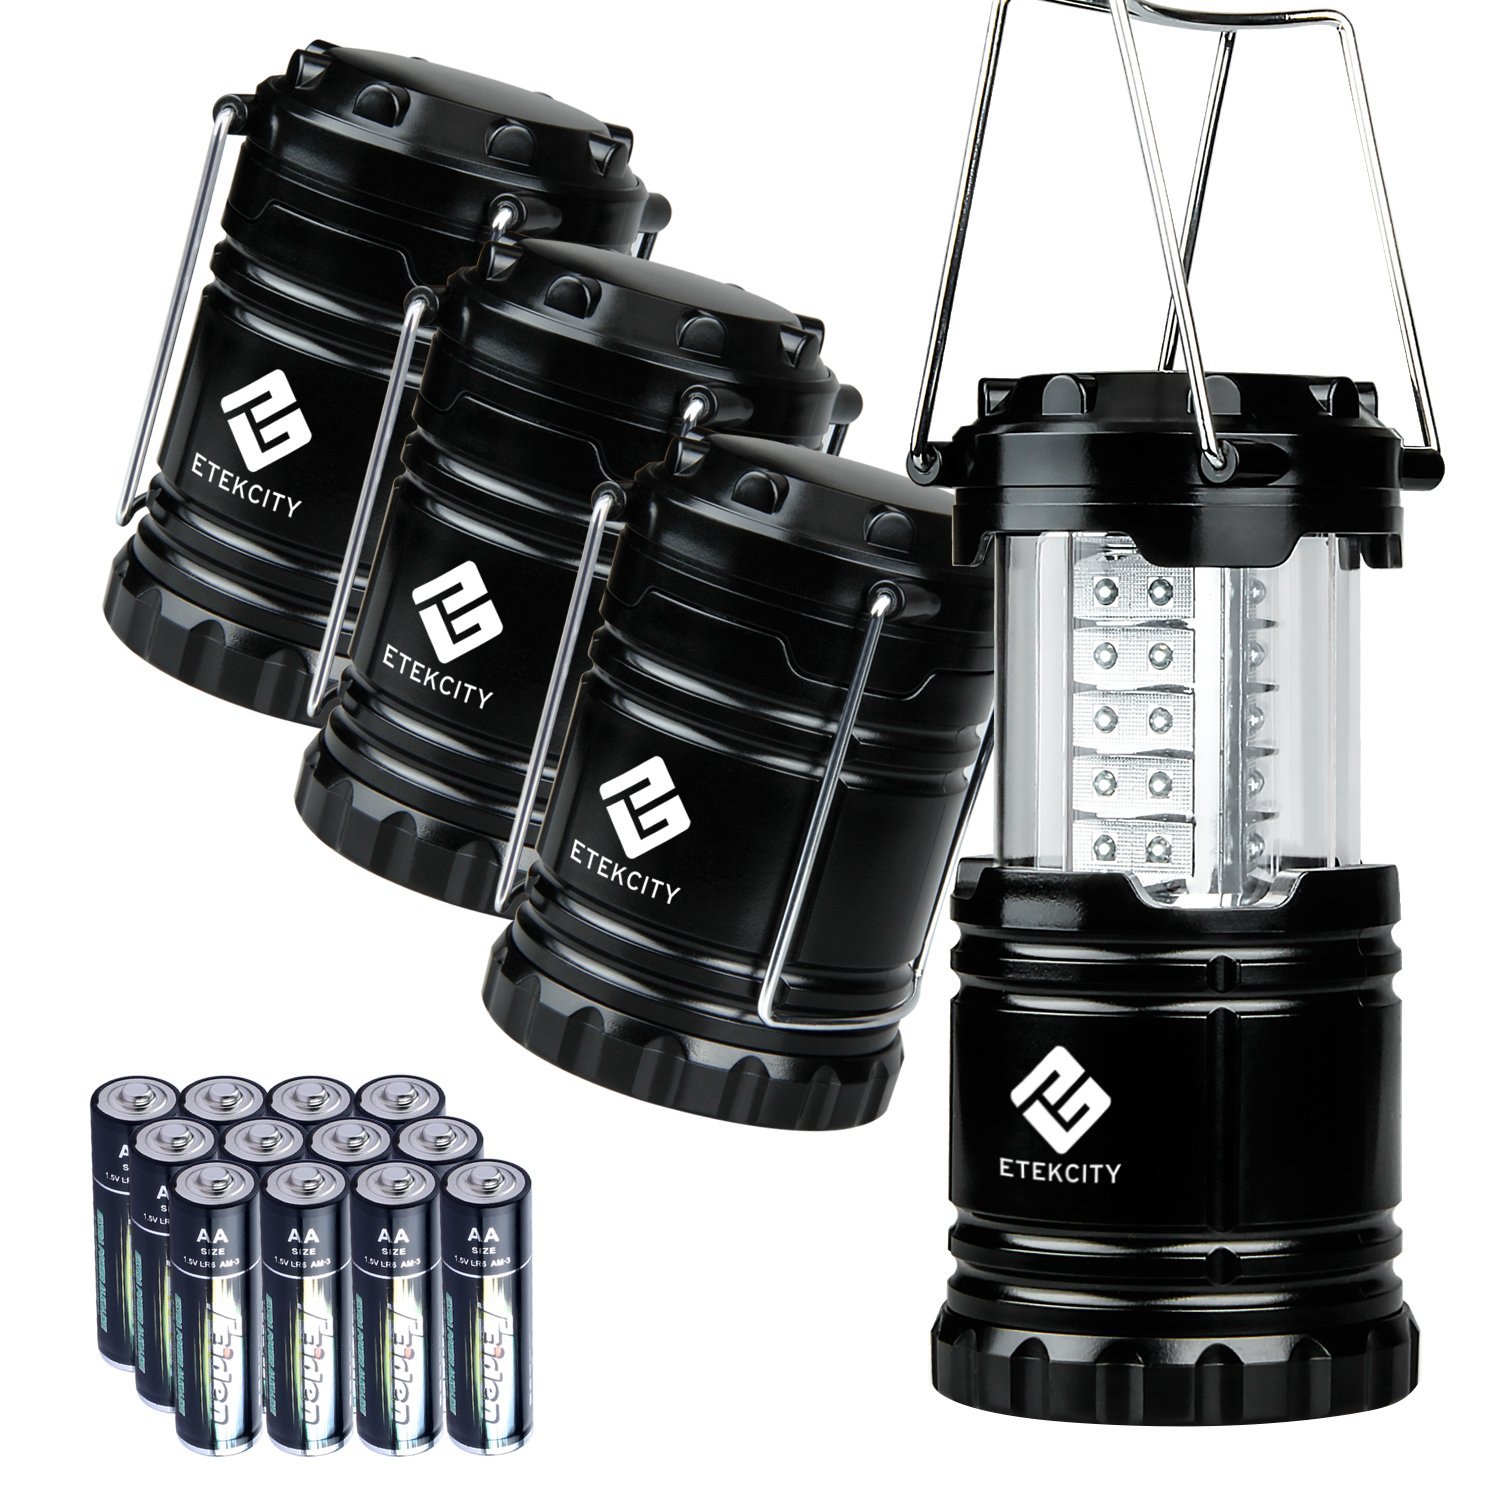 Etekcity 4-pack portable outdoor LED camping lanterns for $18